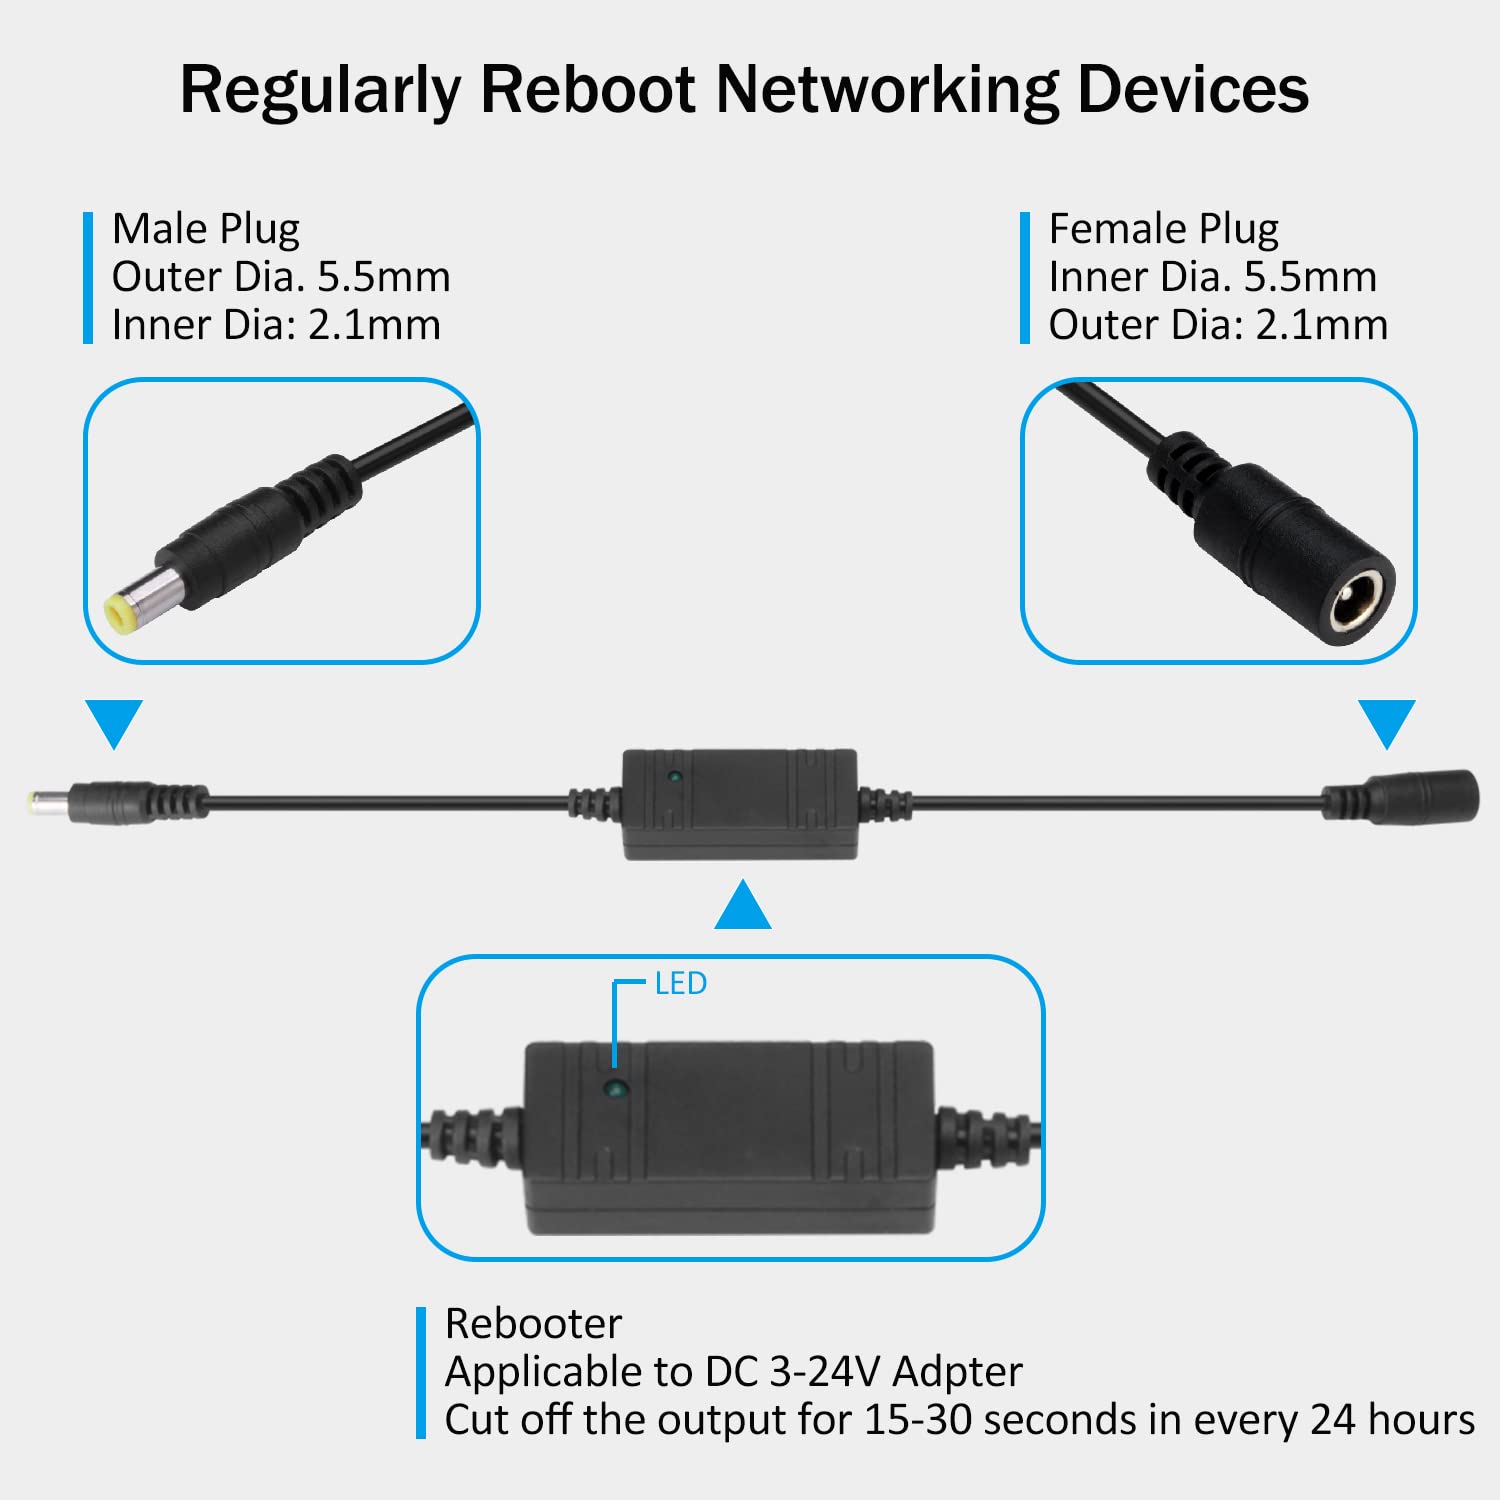 Unplug router for 30 seconds and then plug back in
Reset router to factory settings